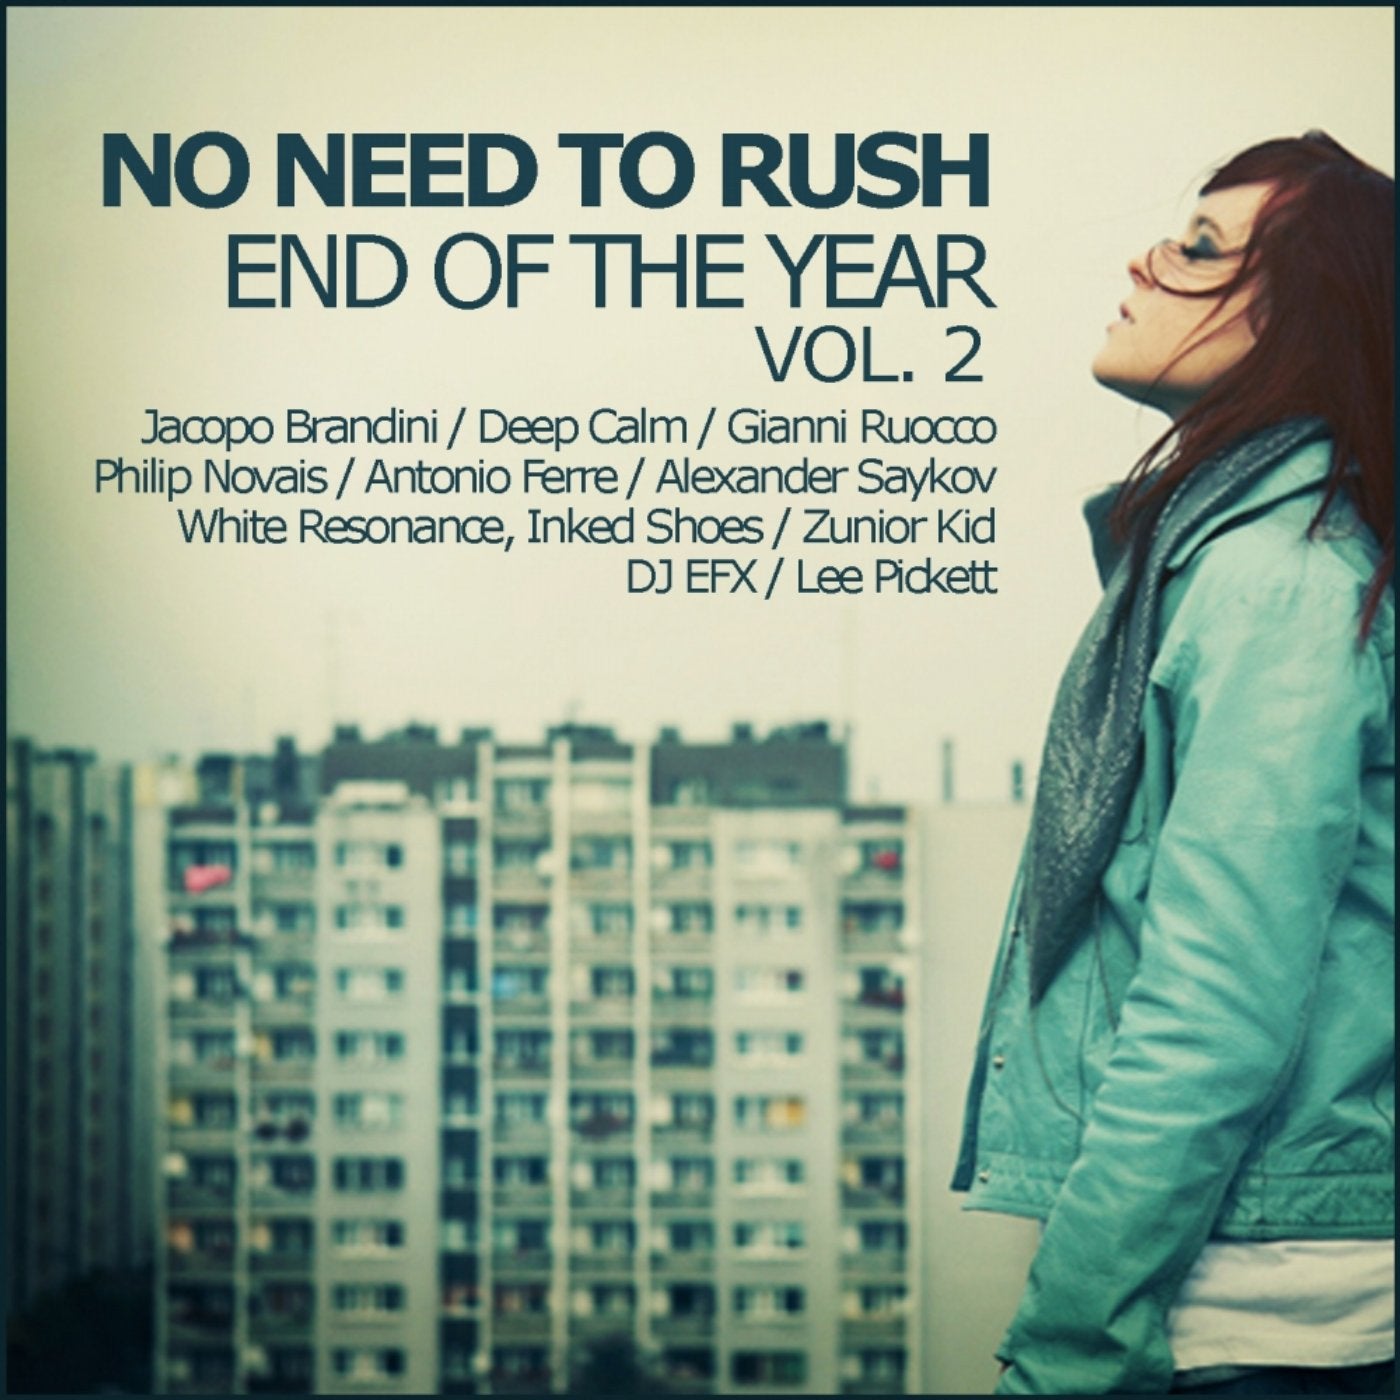 No Need To Rush, Vol. 2: End Of The Year